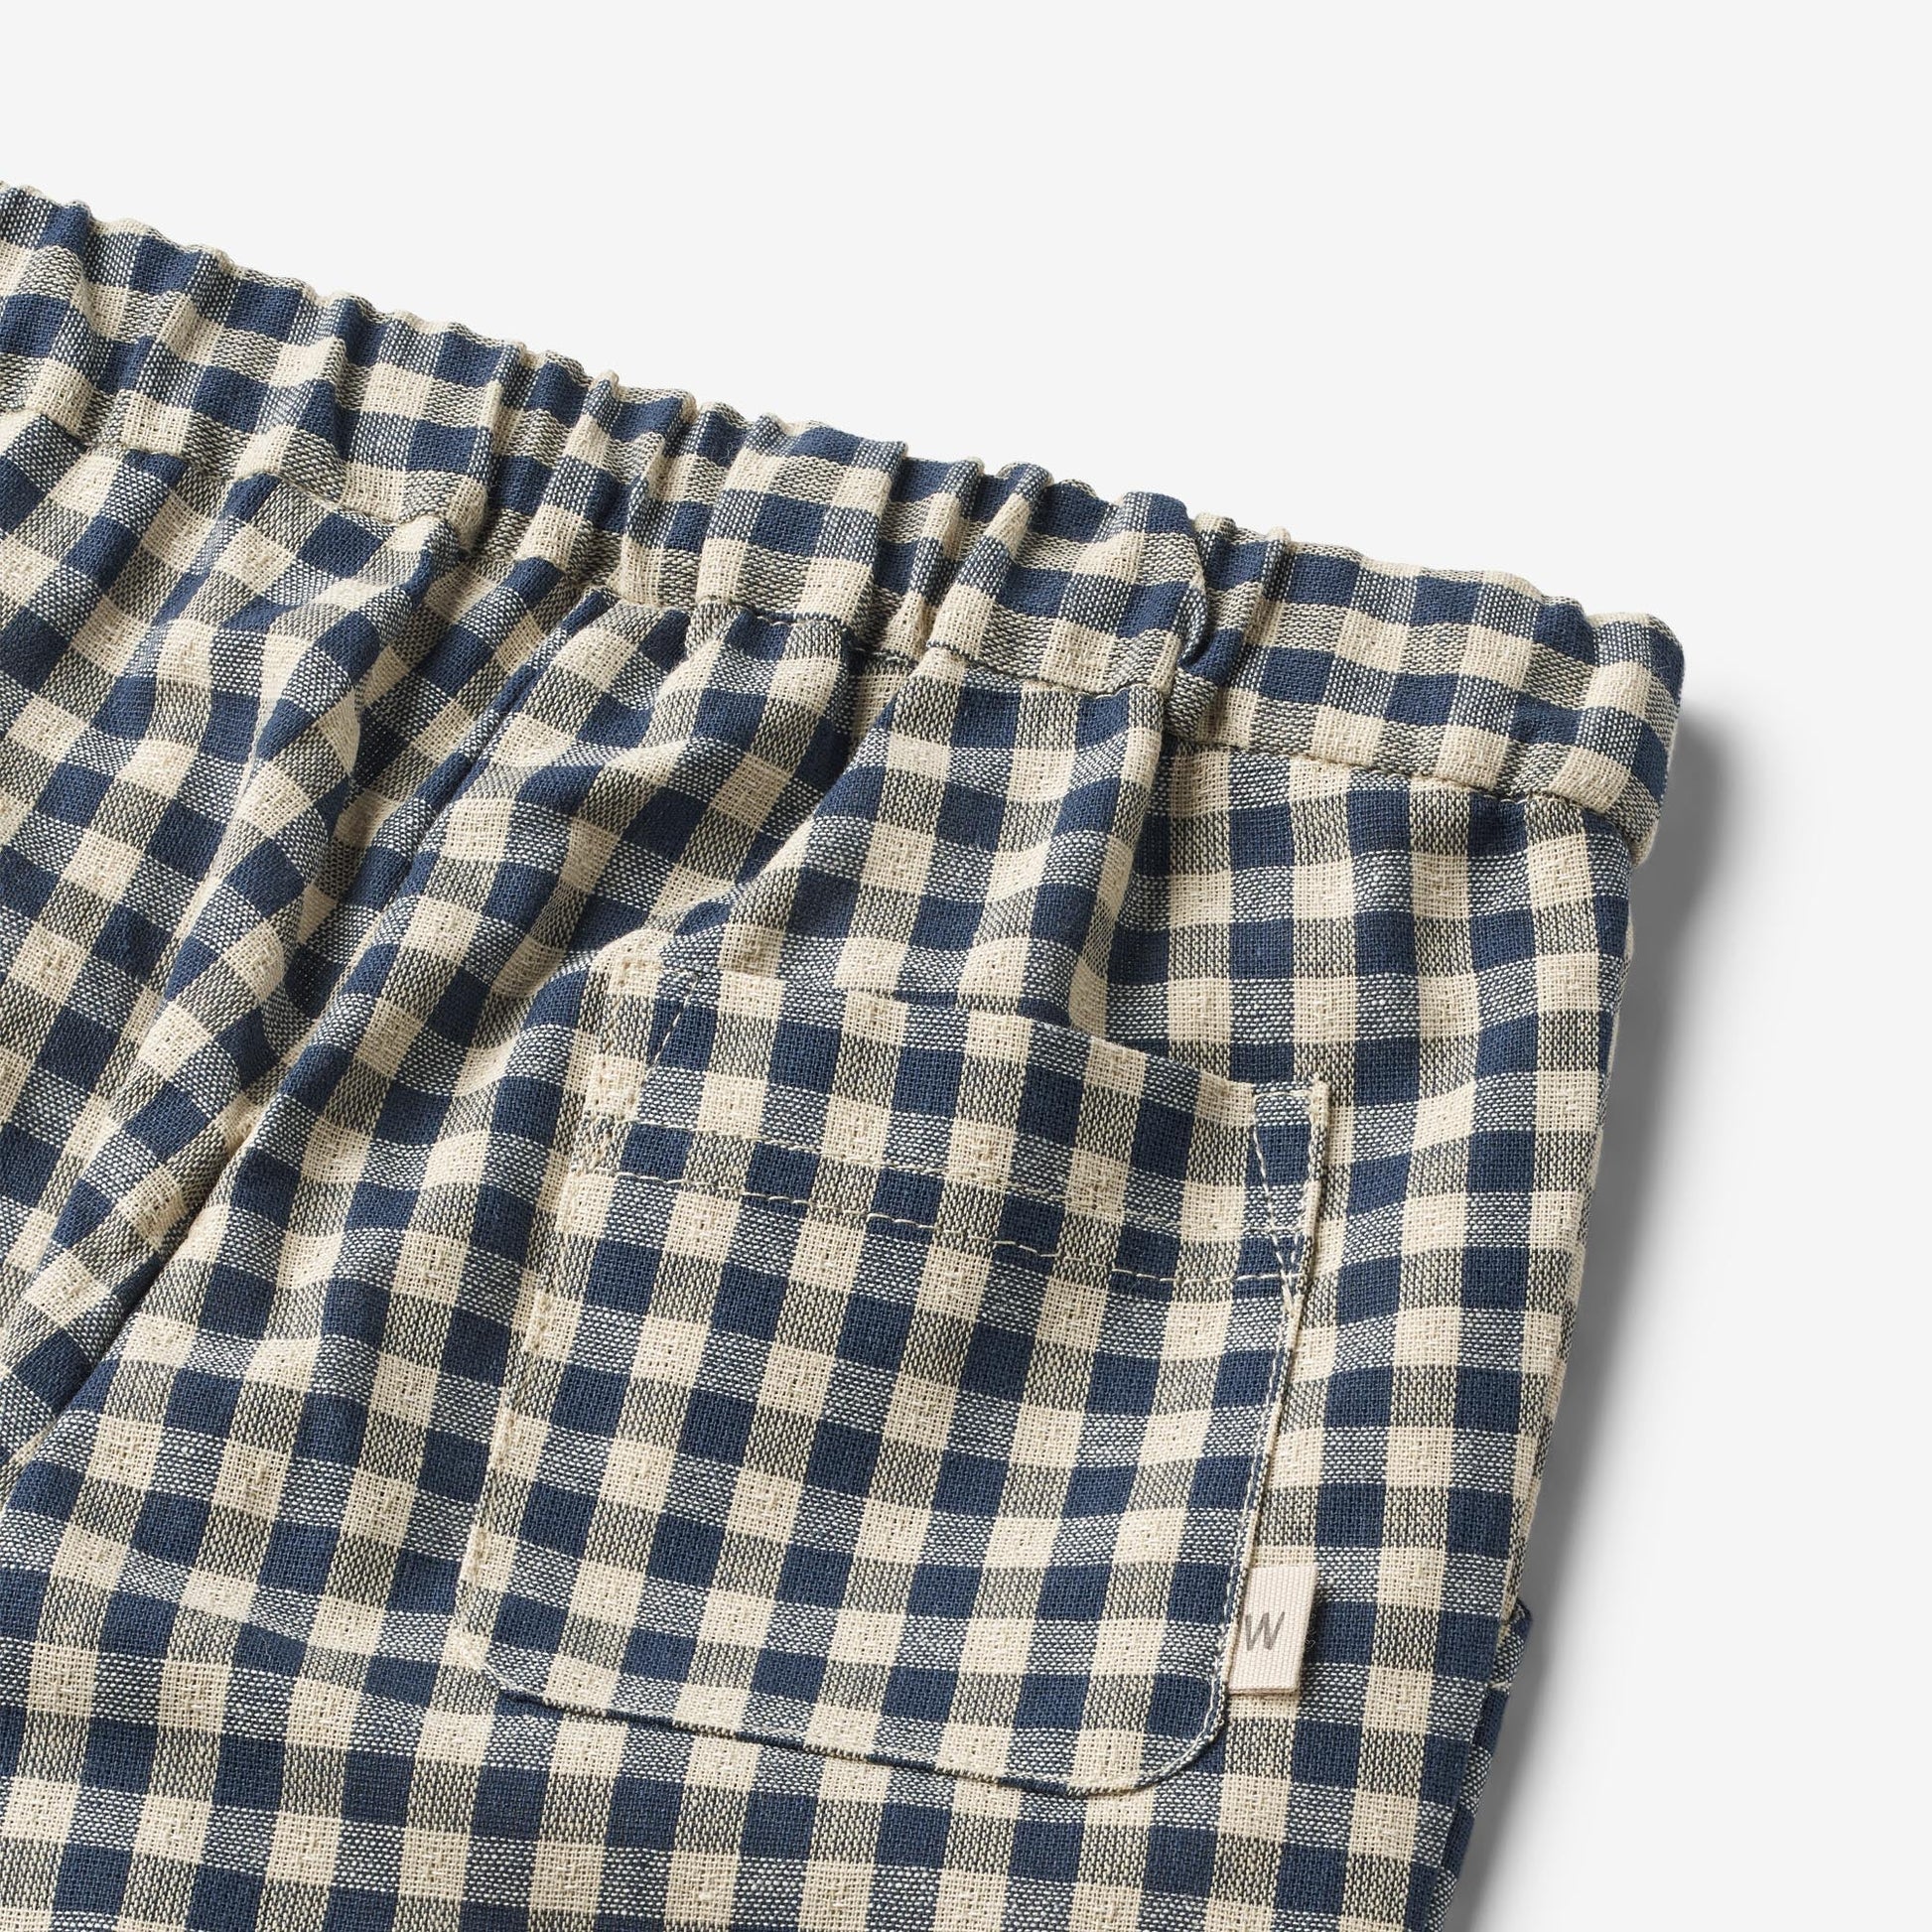 Wheat 'Andy' Baby Trousers - Blue Check